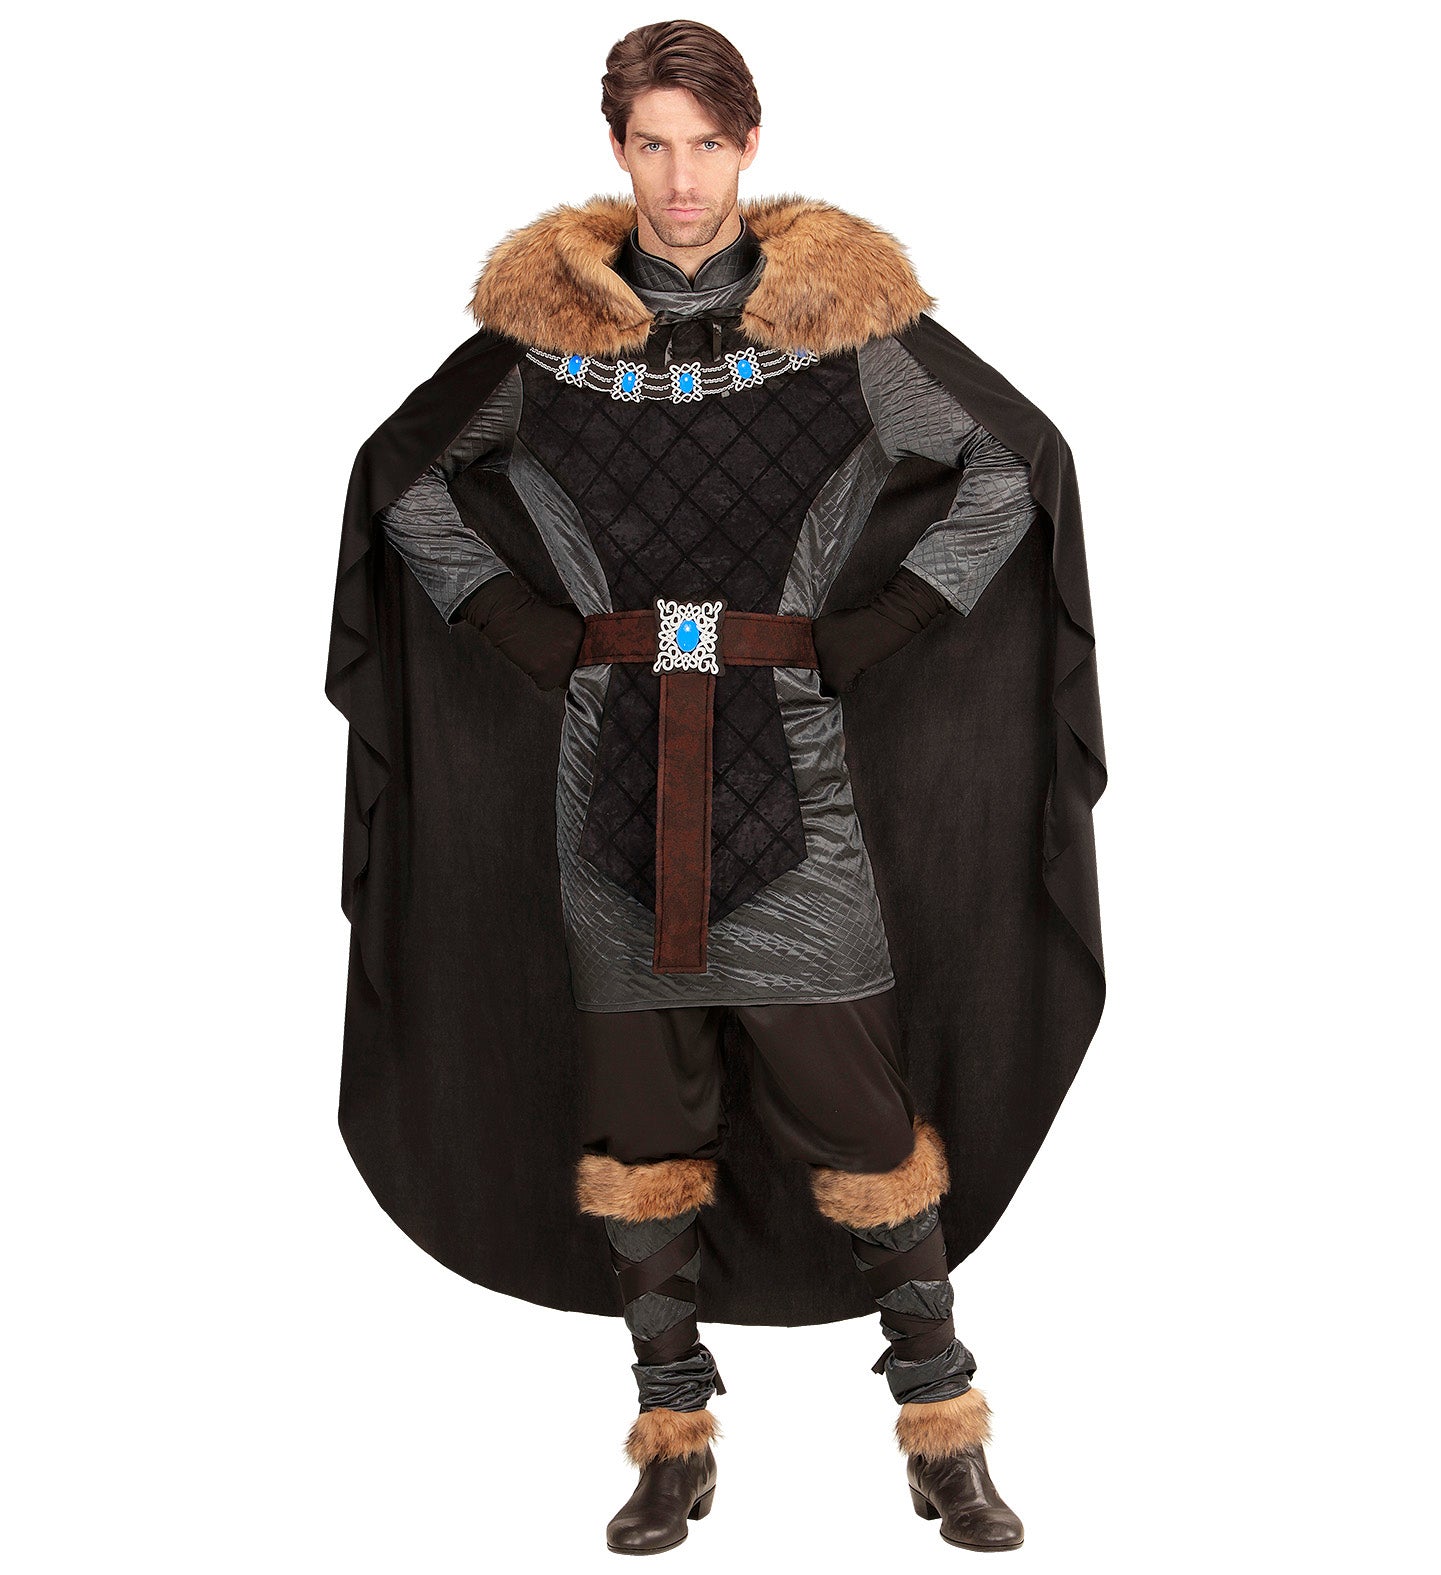 Deluxe Medieval Prince Hamlet Costume